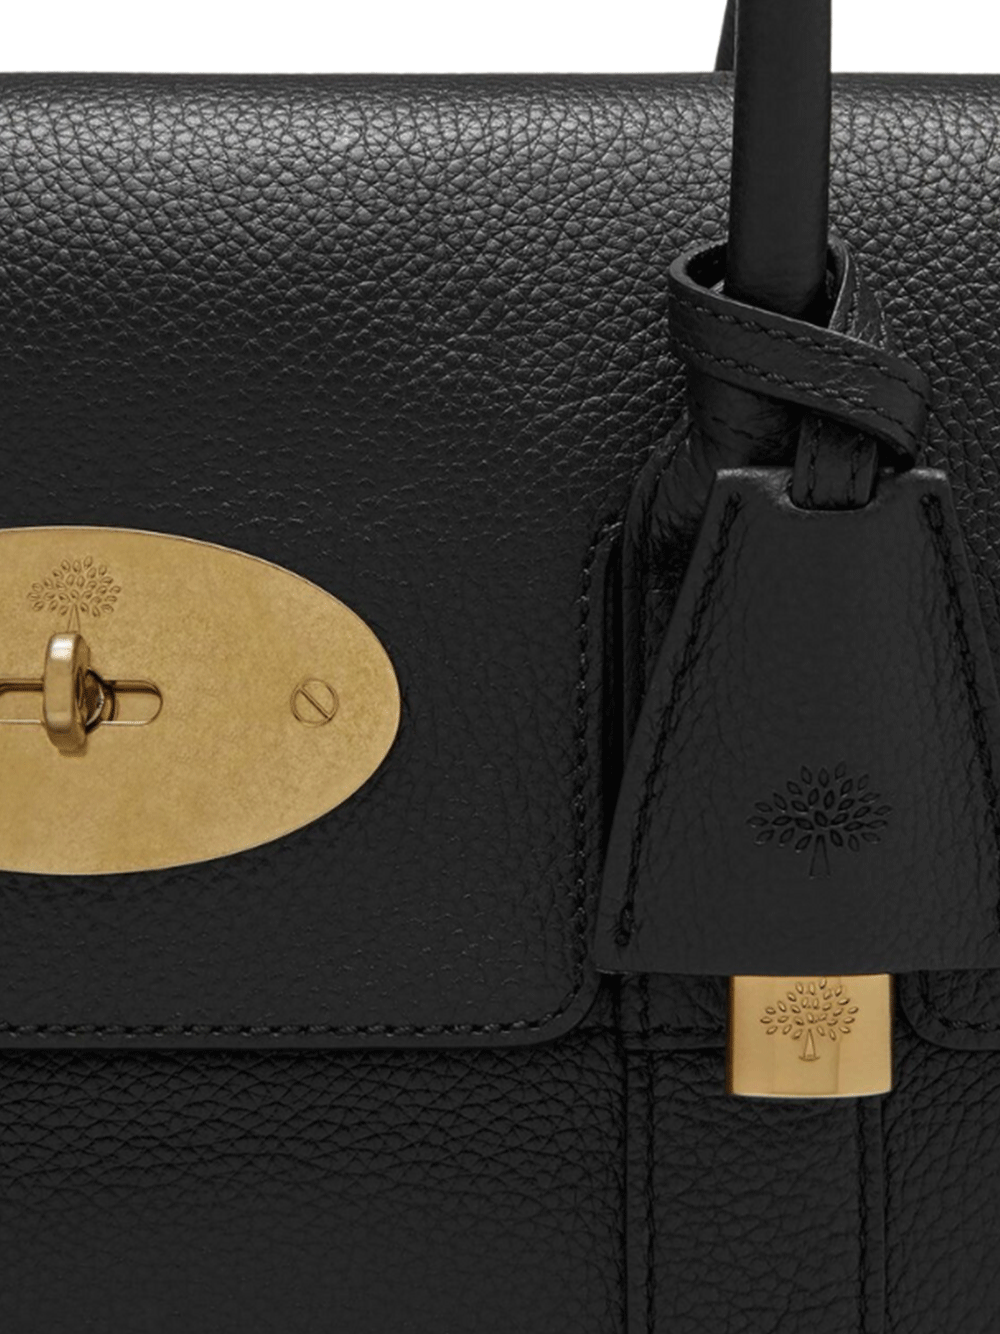 Mulberry-Bayswater-Small-Classic-Grain-Black-5